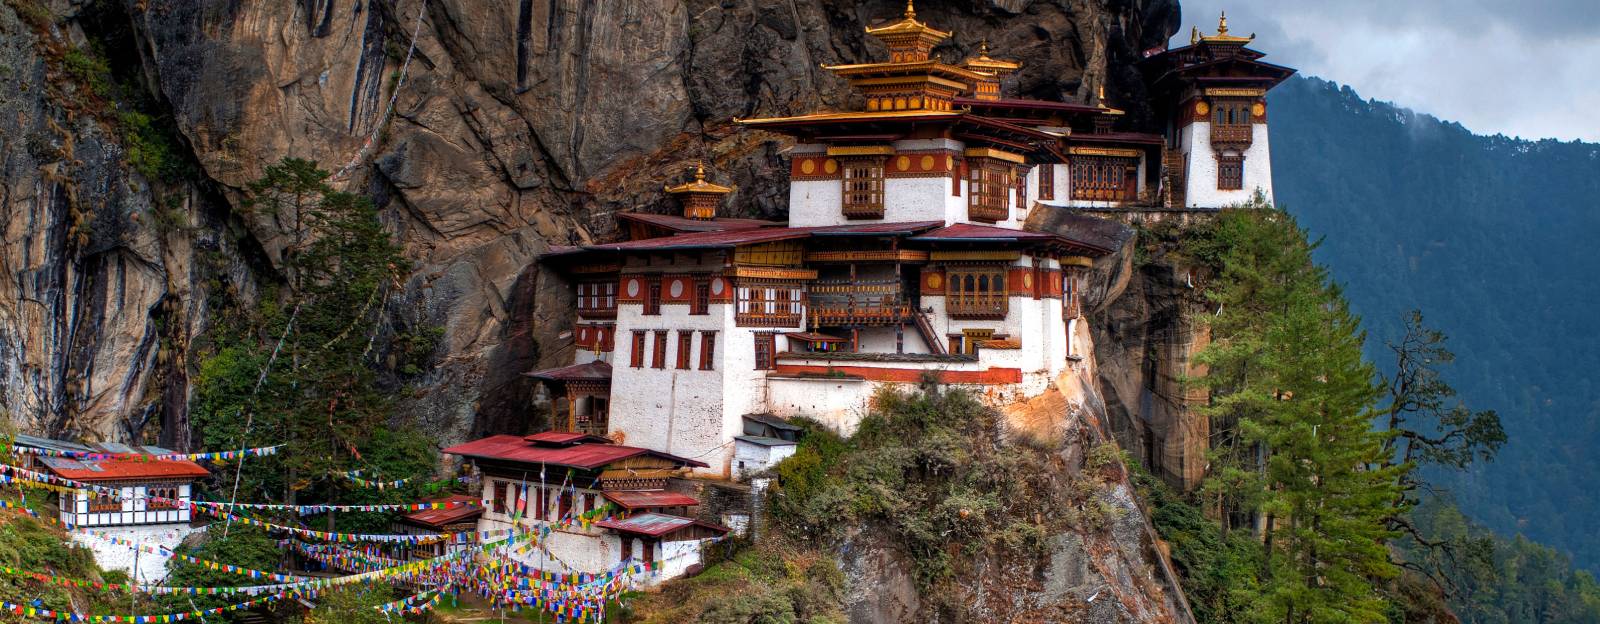 Top 3 places to visit in Bhutan